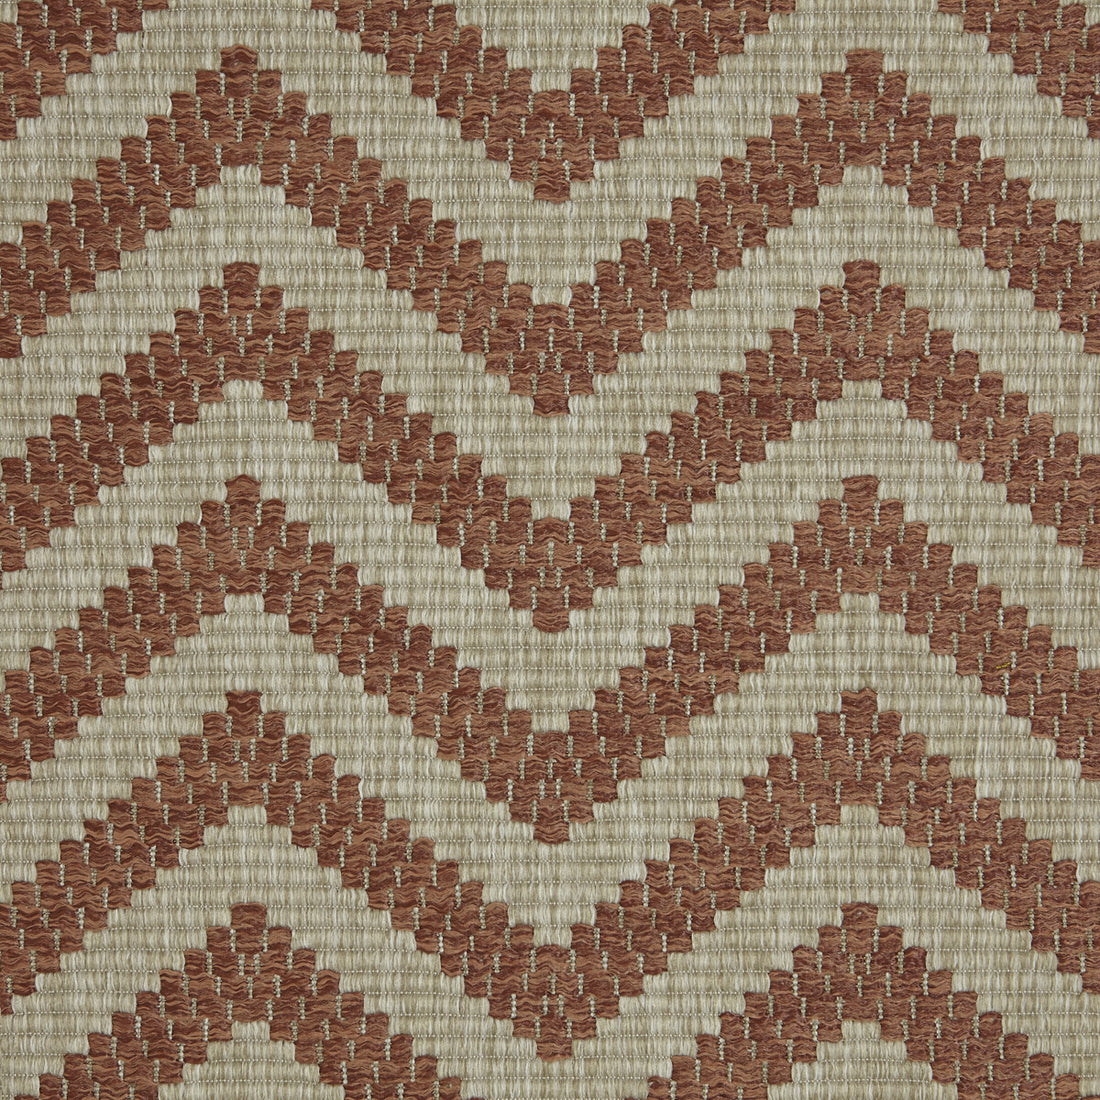 Marelle fabric in 2 color - pattern LZ-30347.02.0 - by Kravet Design in the Lizzo Indoor/Outdoor collection